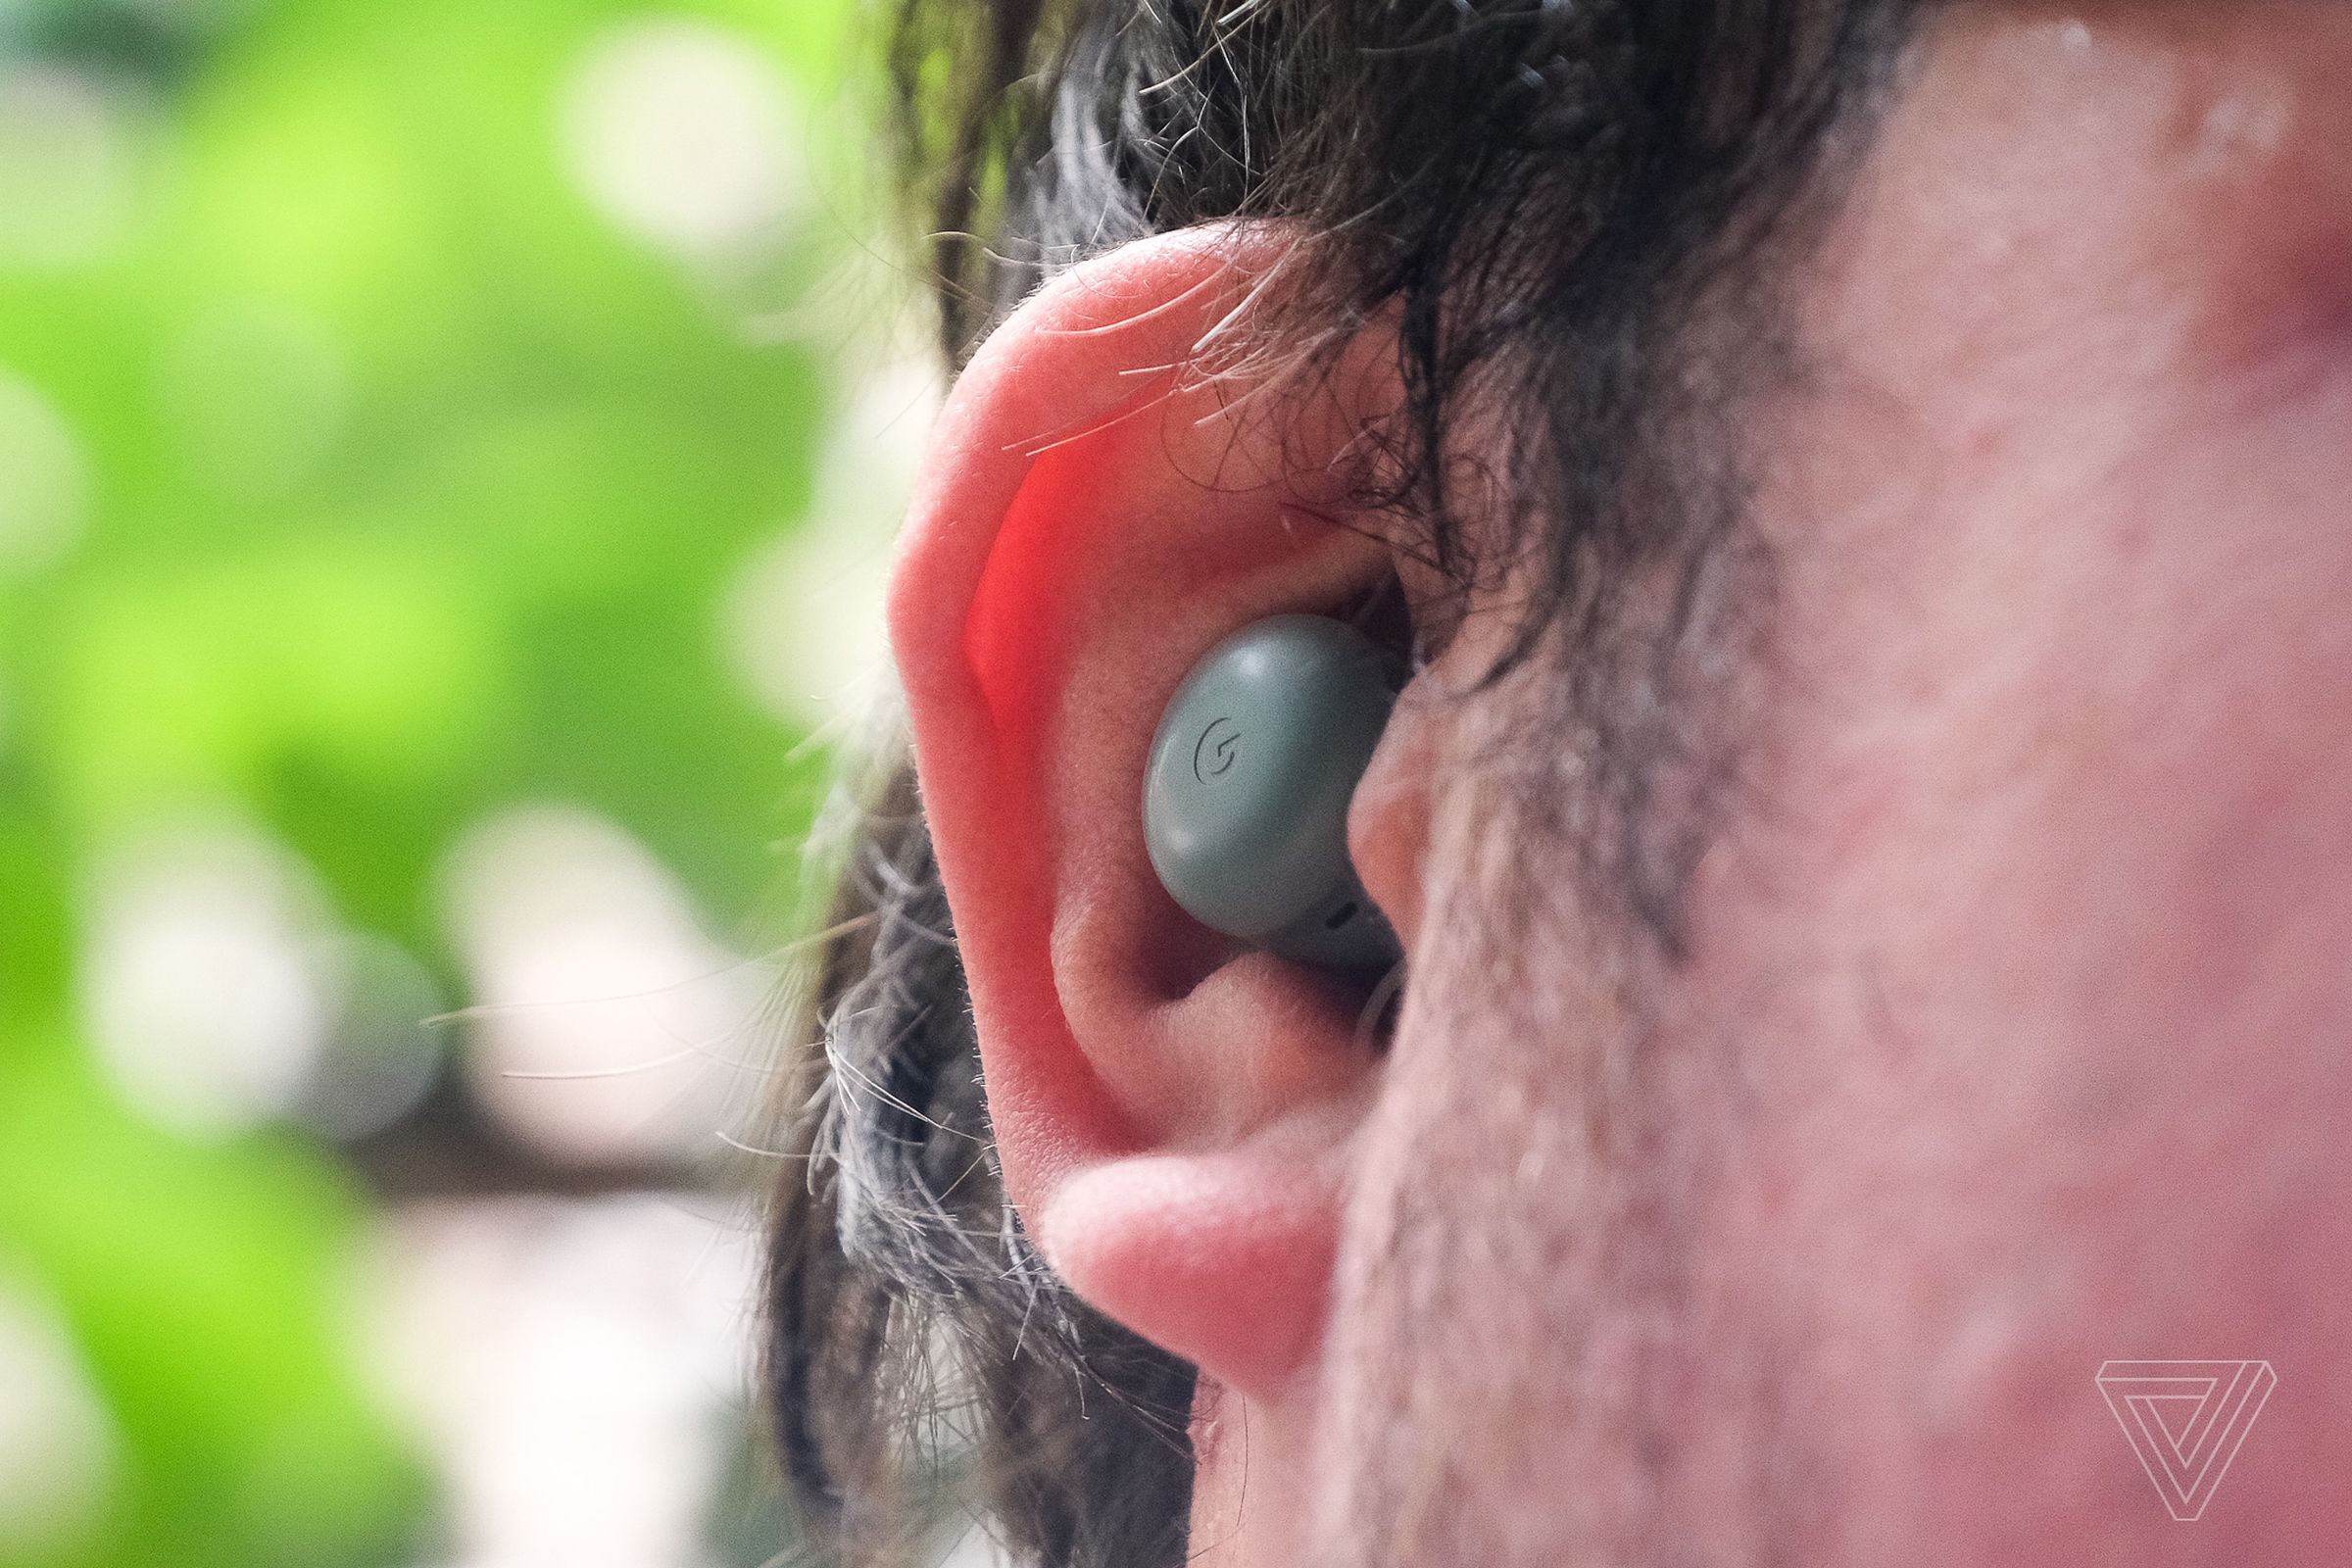 They still have a discreet design that sits flush against your ear and doesn’t stick out far.